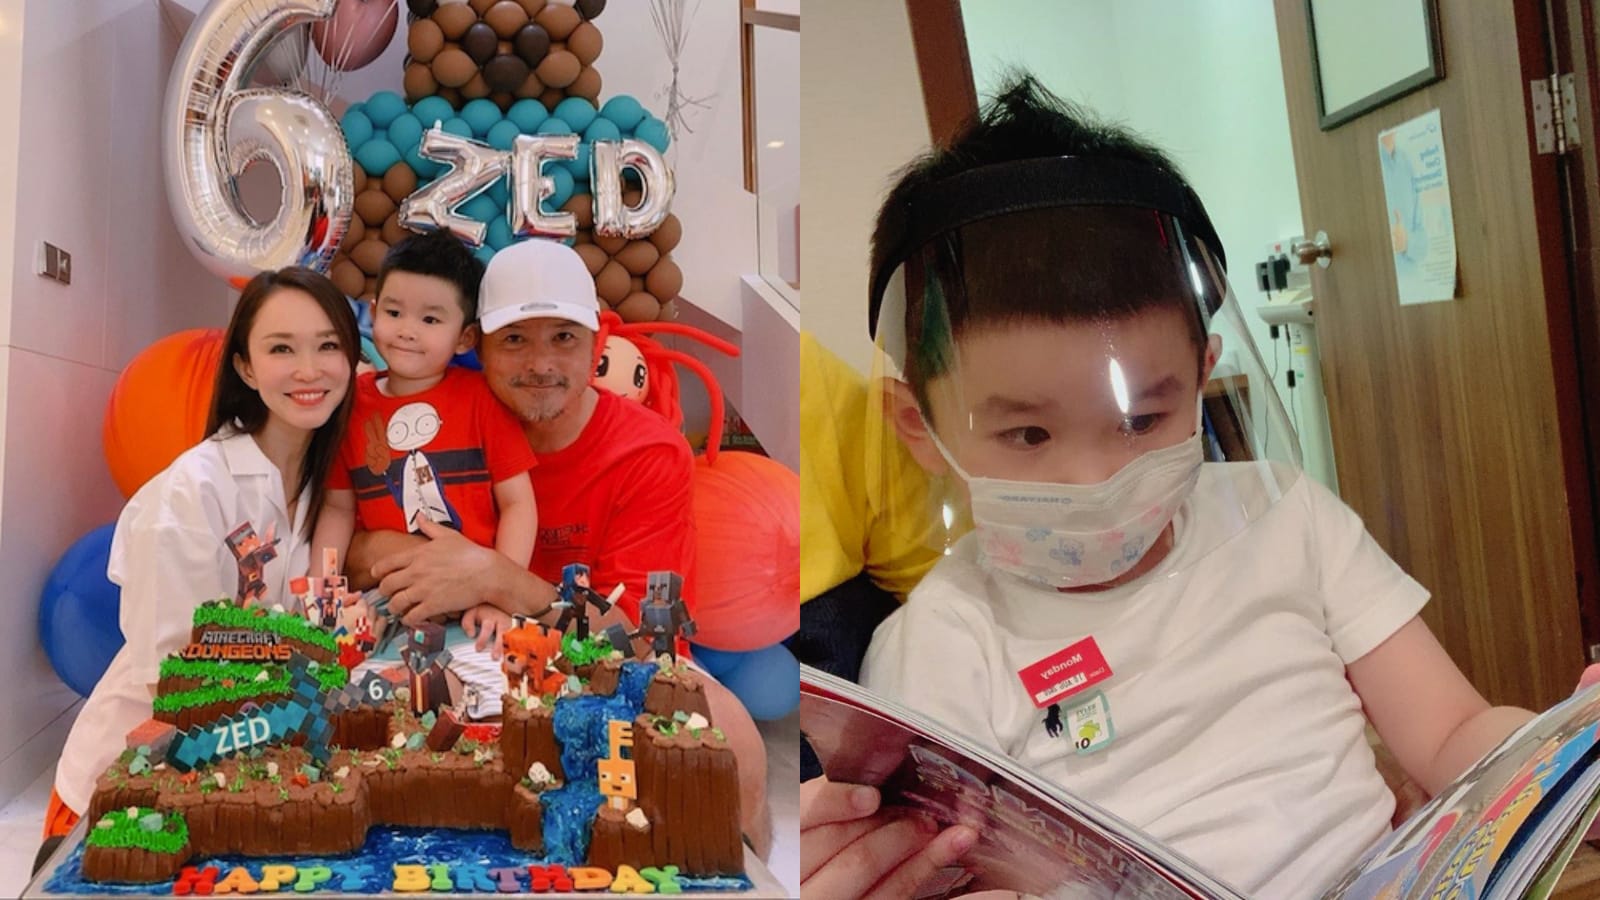 Fann Wong & Christopher Lee’s Son Was Hospitalised For An Ear Infection The Day After His 6th Birthday